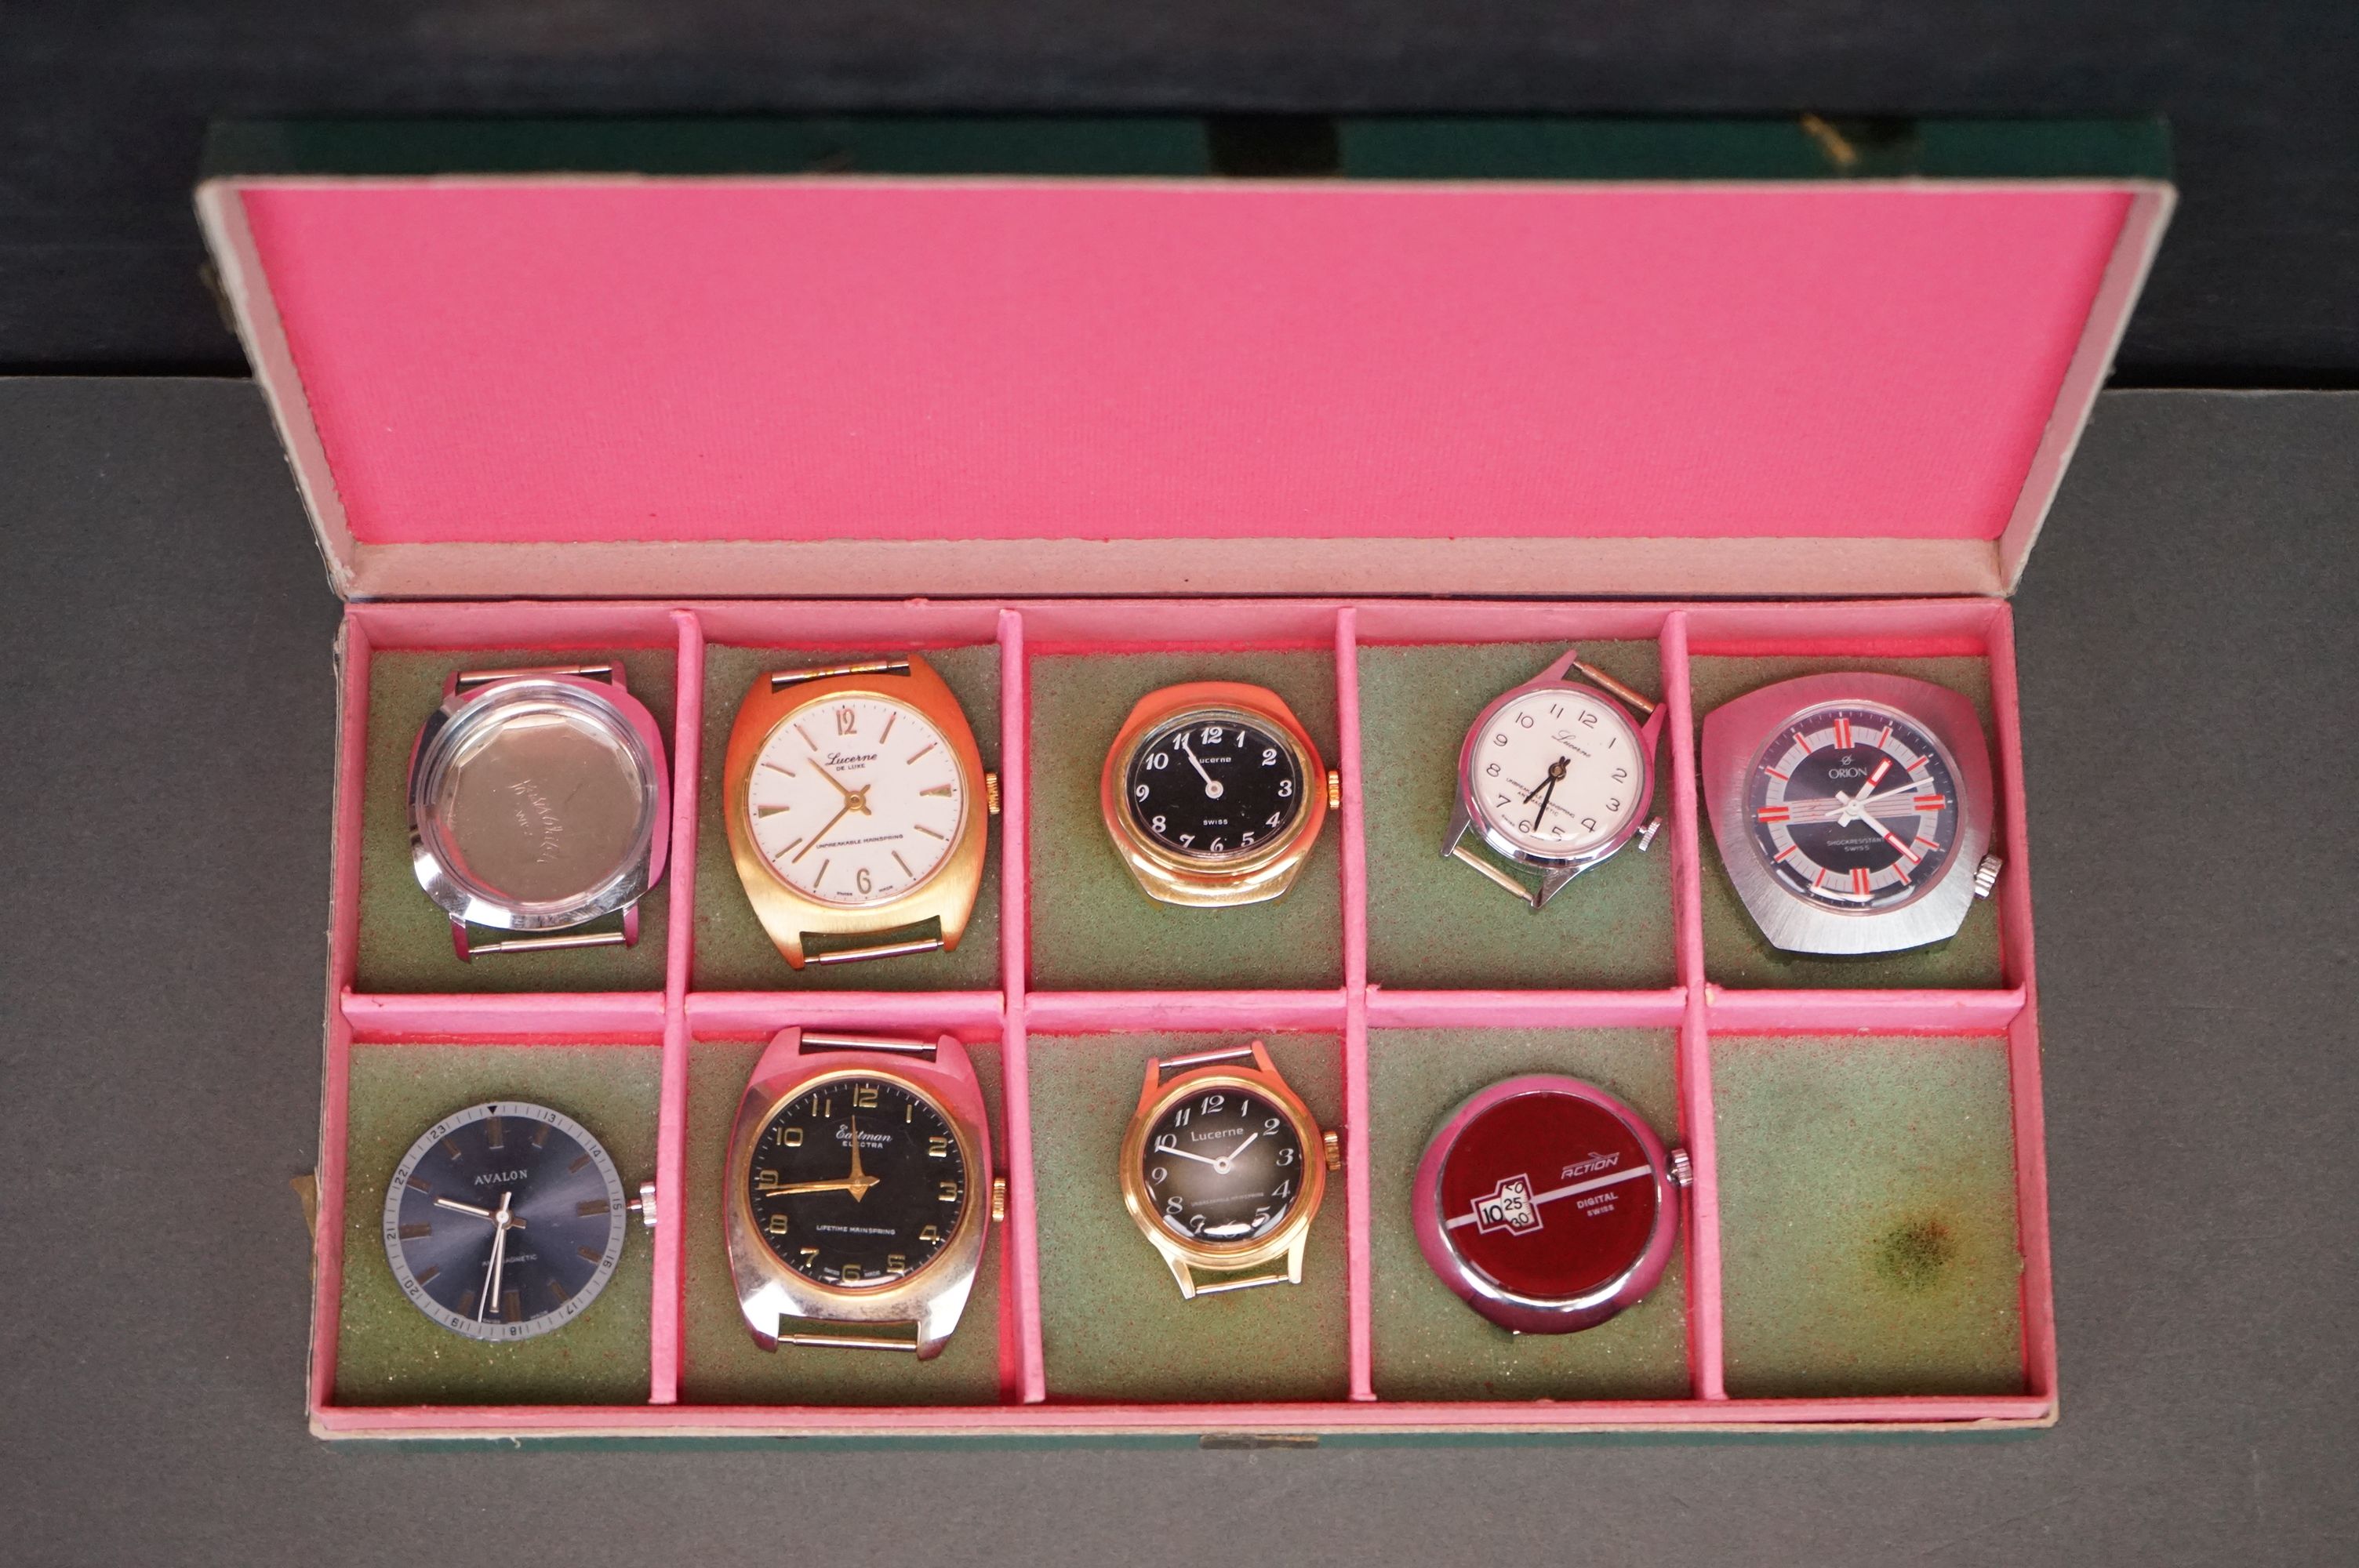 A group of vintage watches to include Eastman, Orion, Avalon, Lucerne and Action Digital.